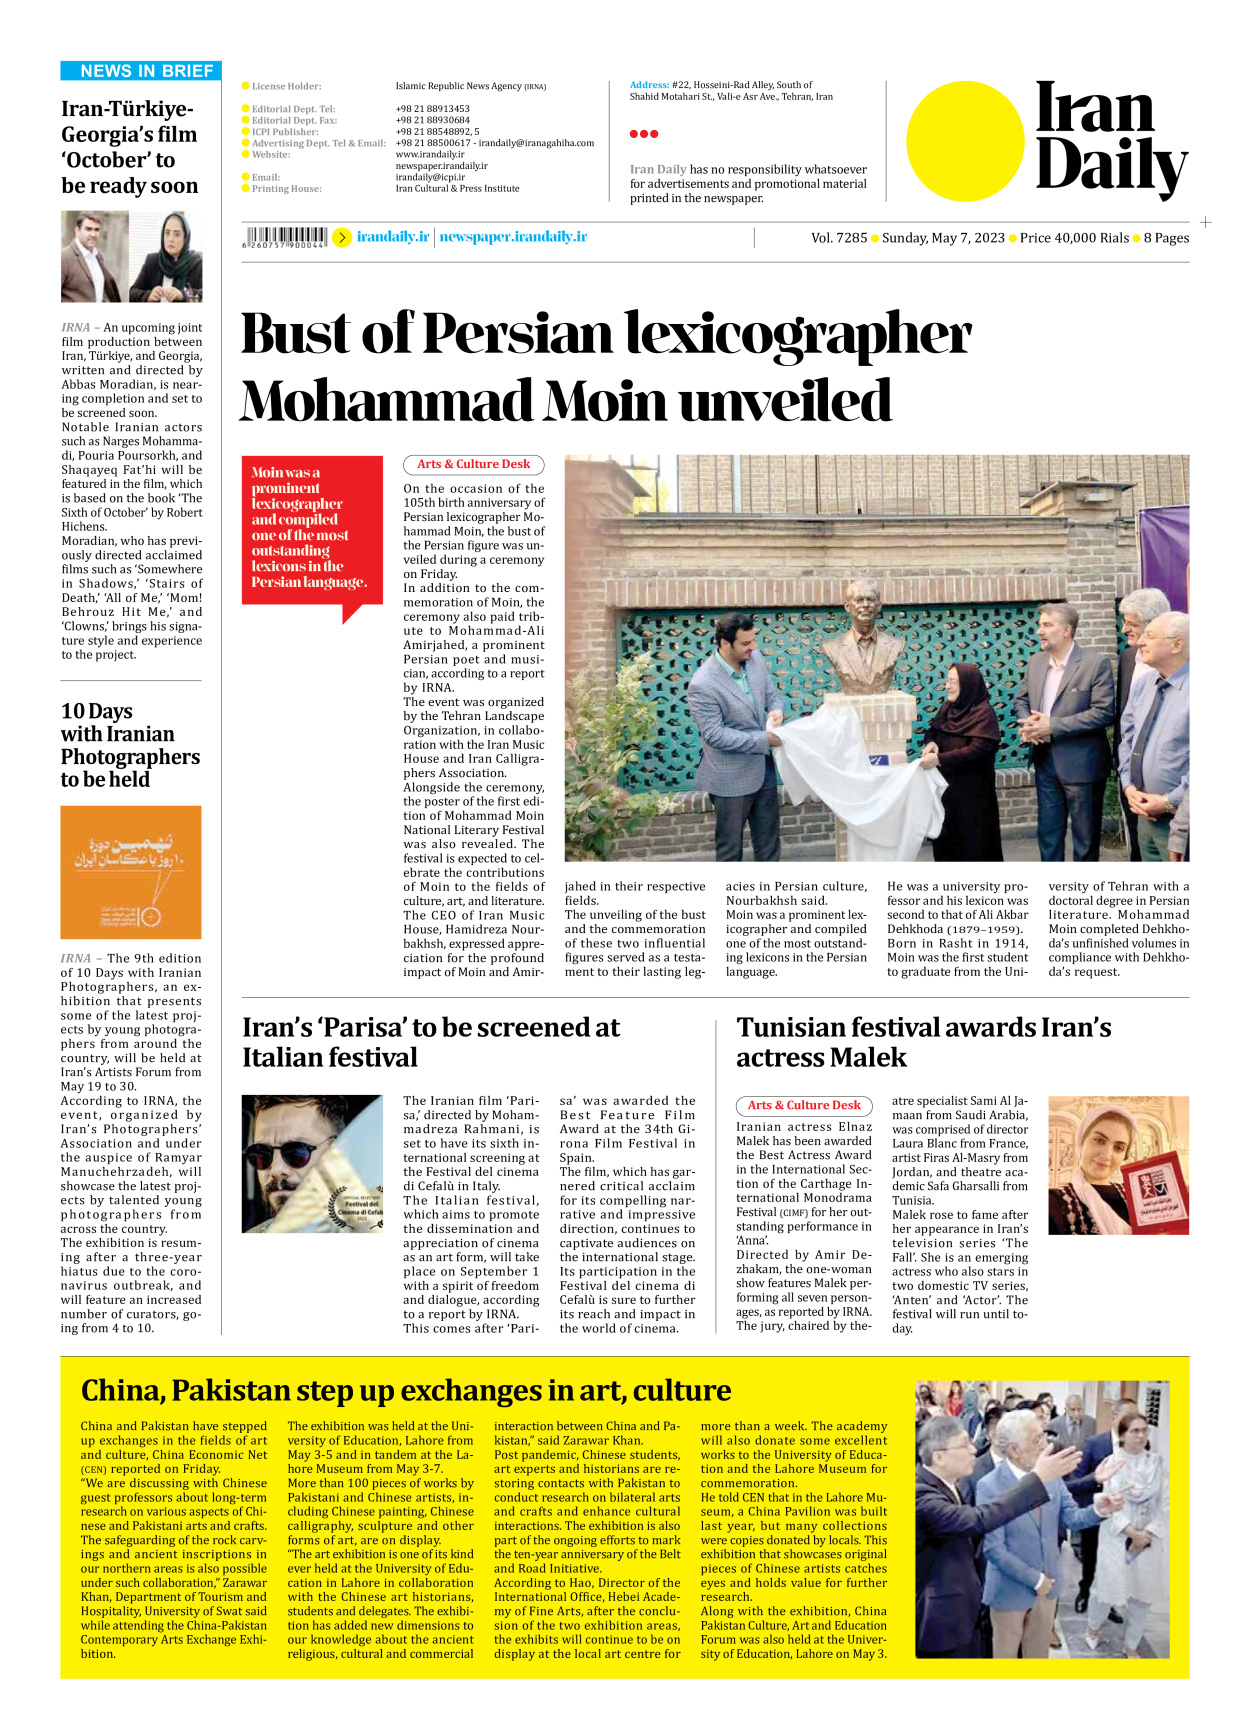 Iran Daily - Number Seven Thousand Two Hundred and Eighty Five - 07 May 2023 - Page 8